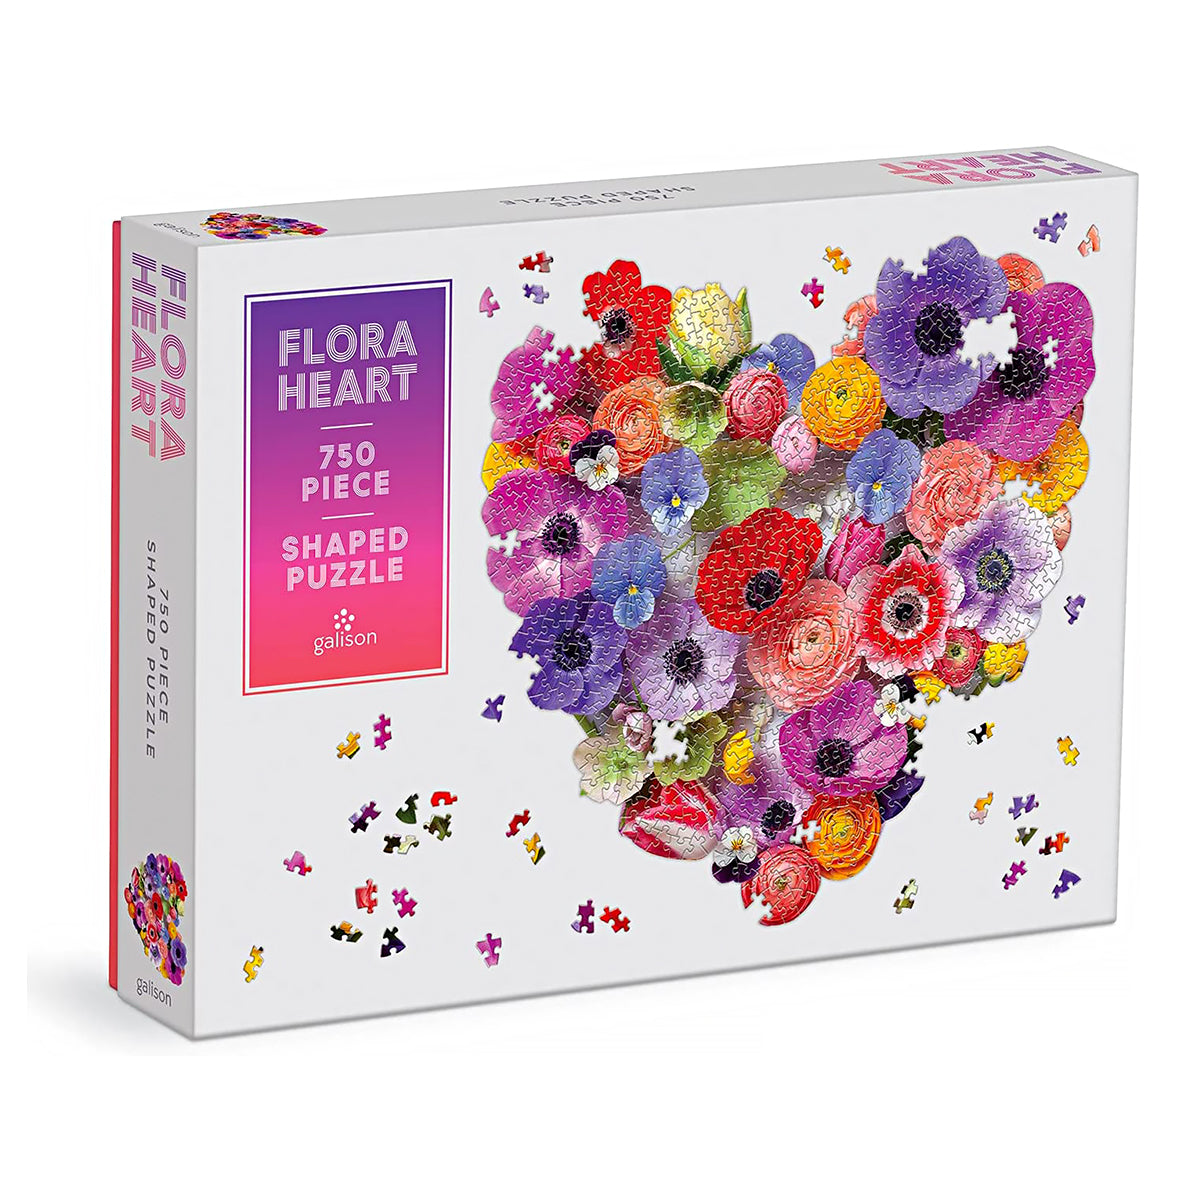 Flora Heart 750 Piece Shaped Puzzle from Galison UK